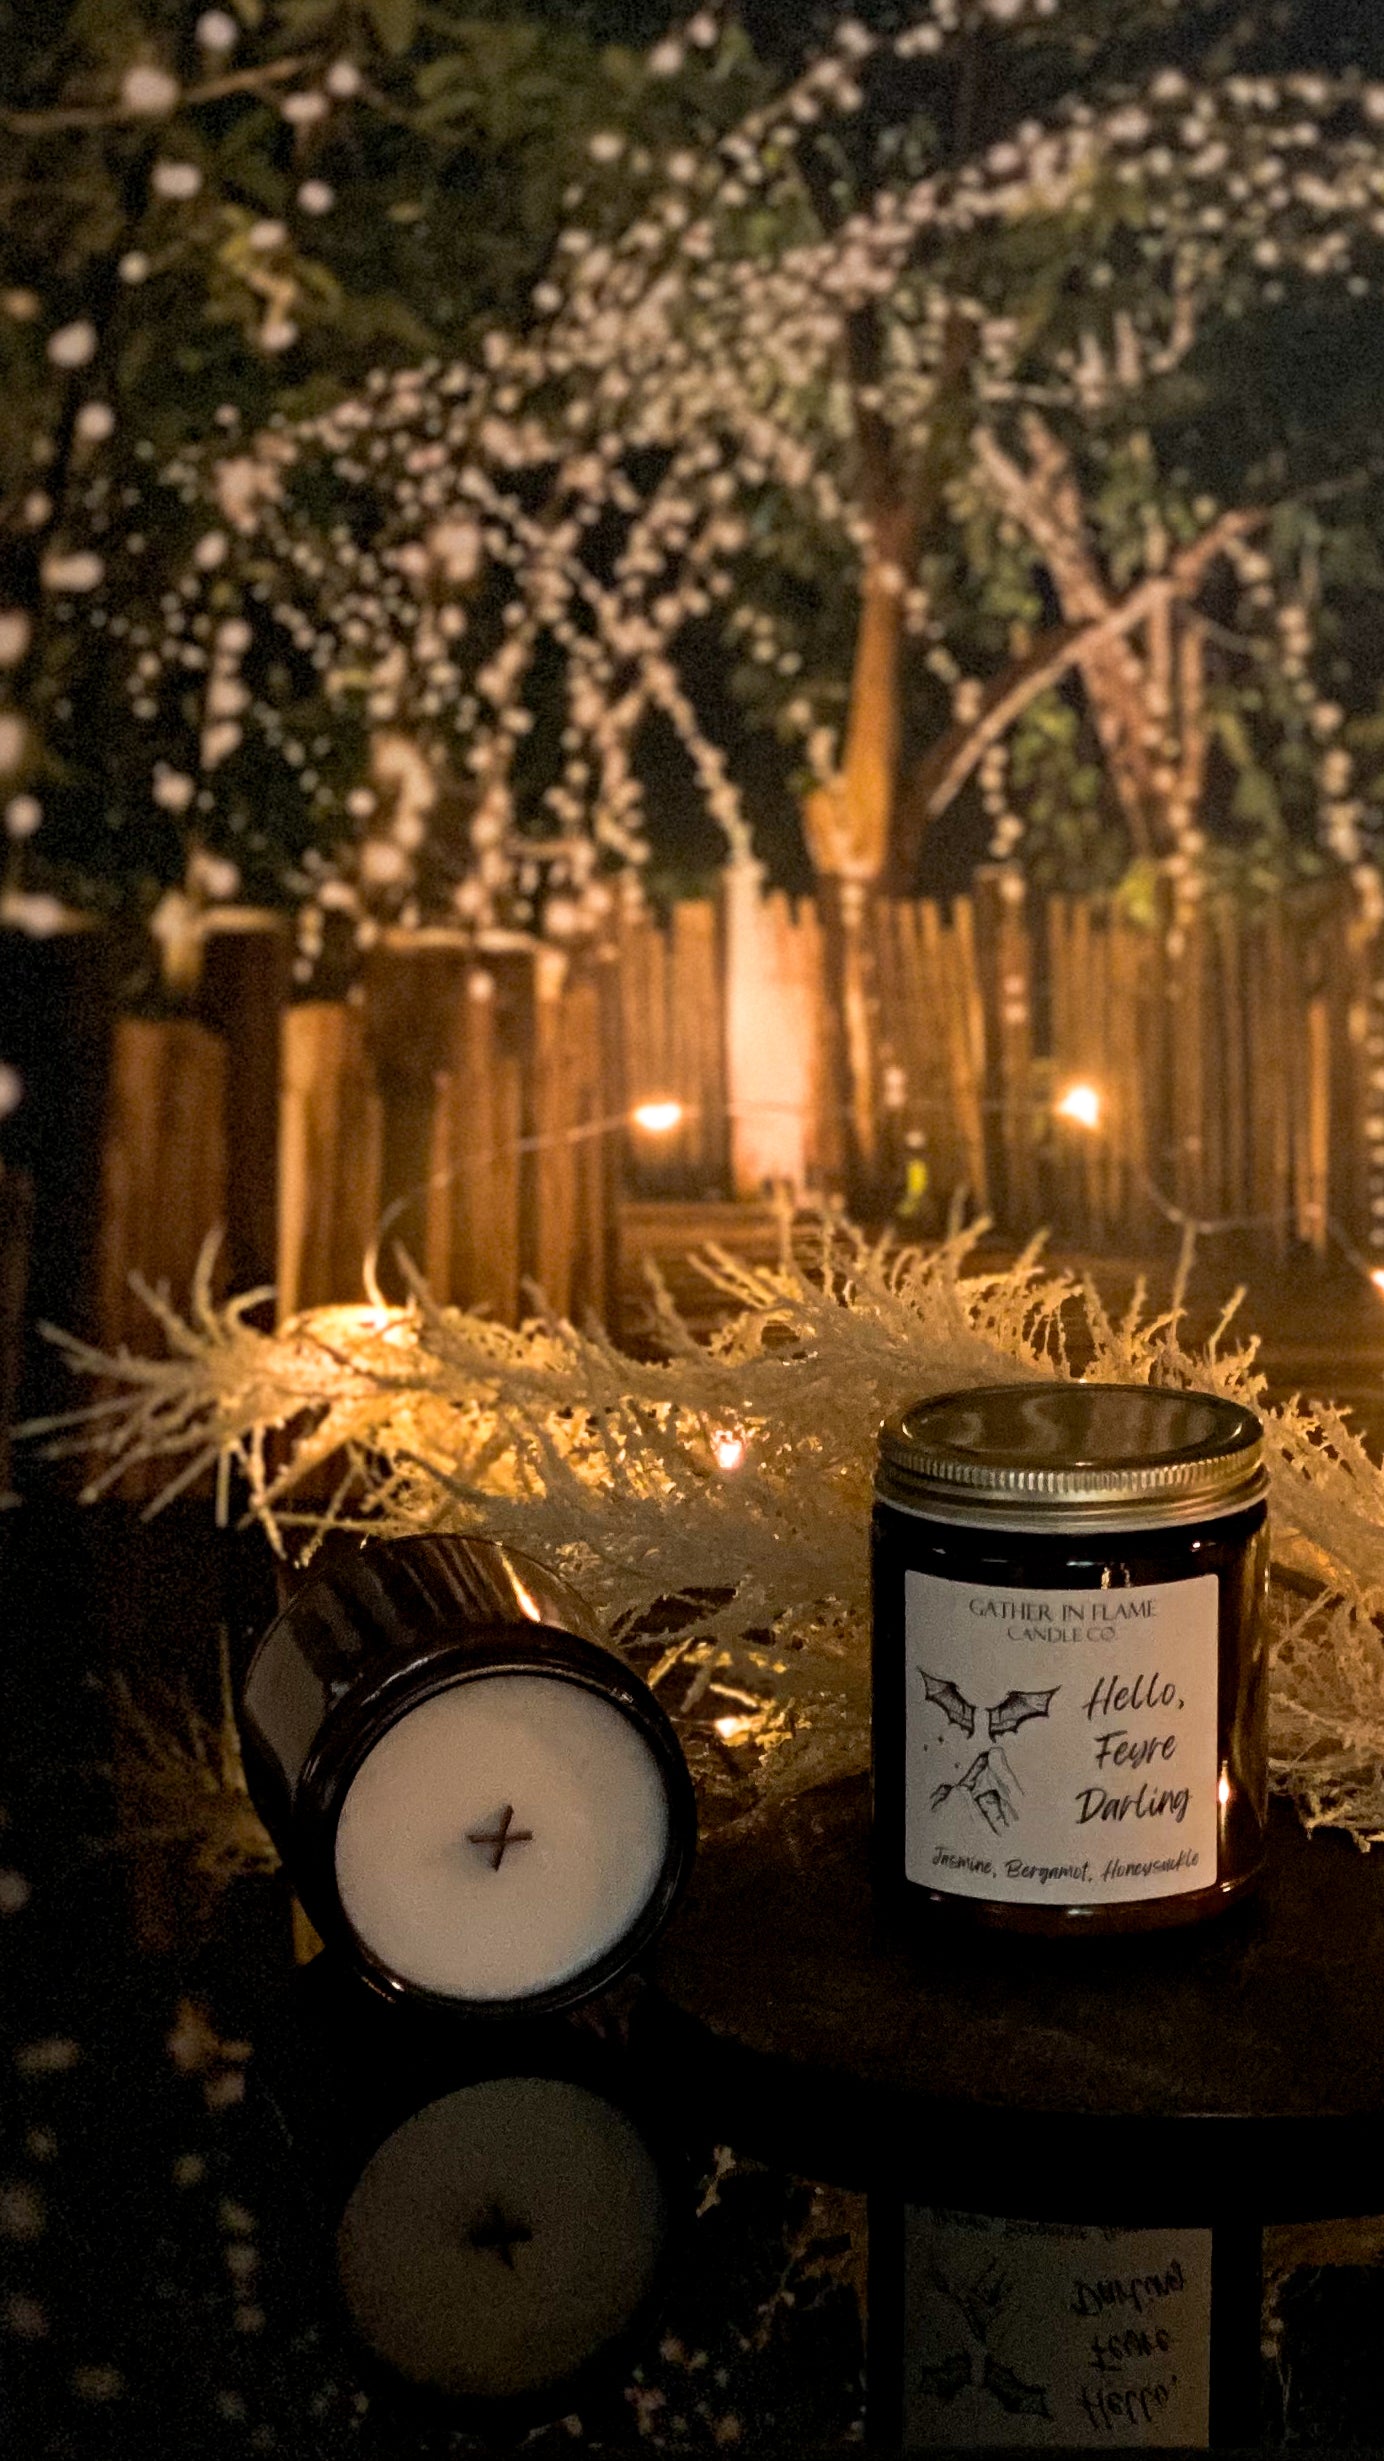 Hello, Feyre Darling Coconut Wax, X-Wooden Wick Candle